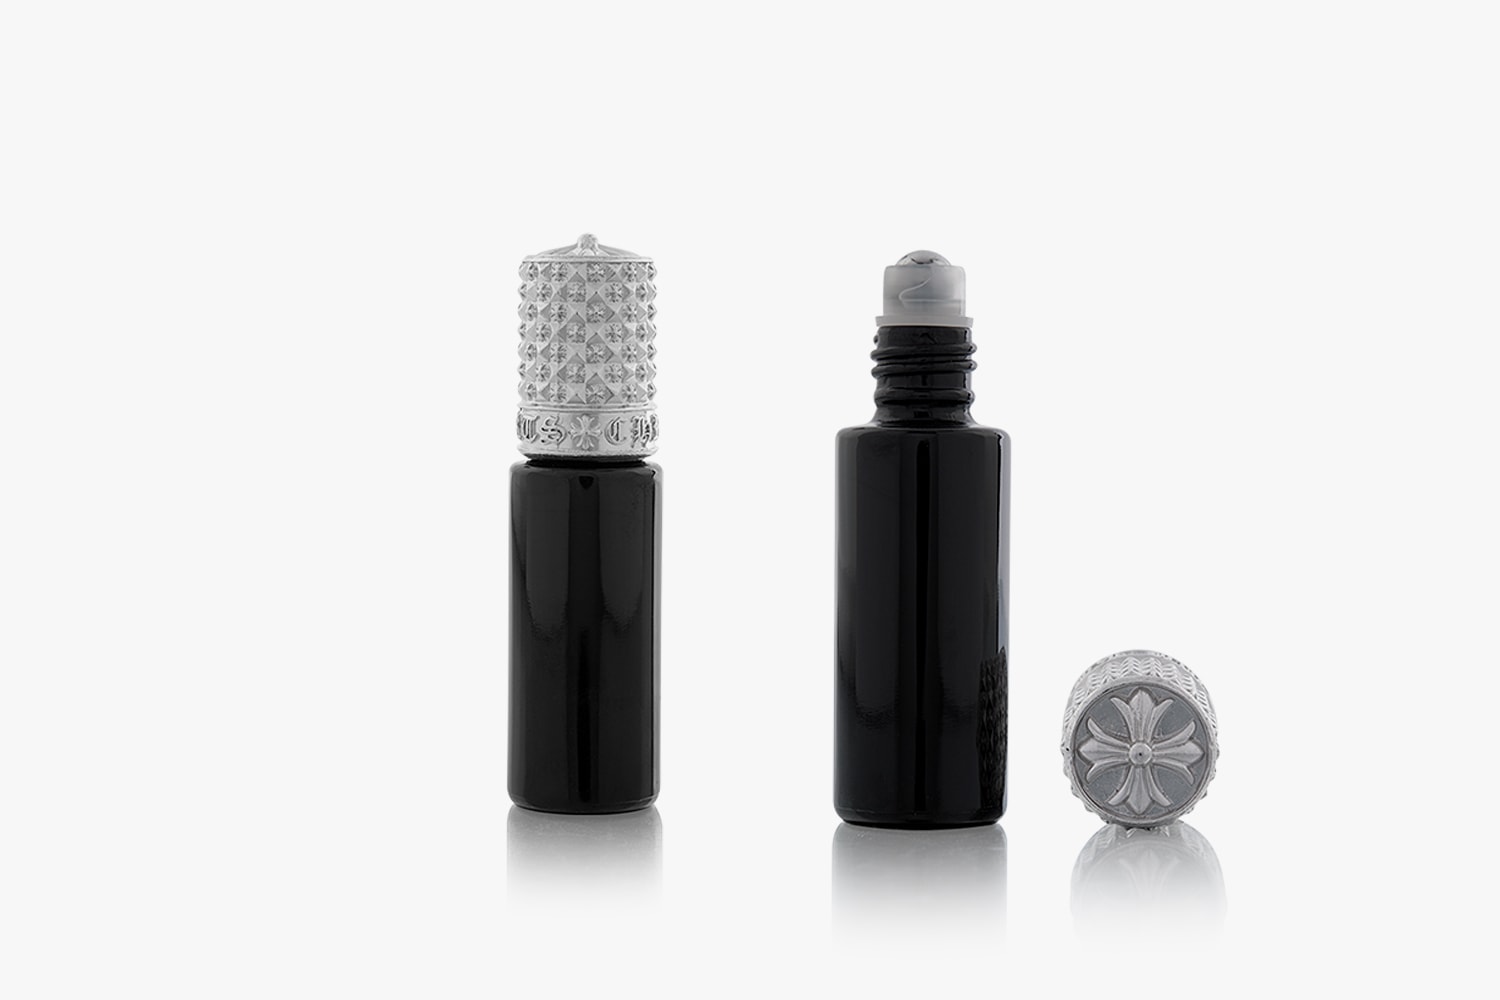 Chrome Hearts Plunger +22+/+33+ Scents Nail Polish Online Release Buy Price Plunger Nail Polish Candle Perfume